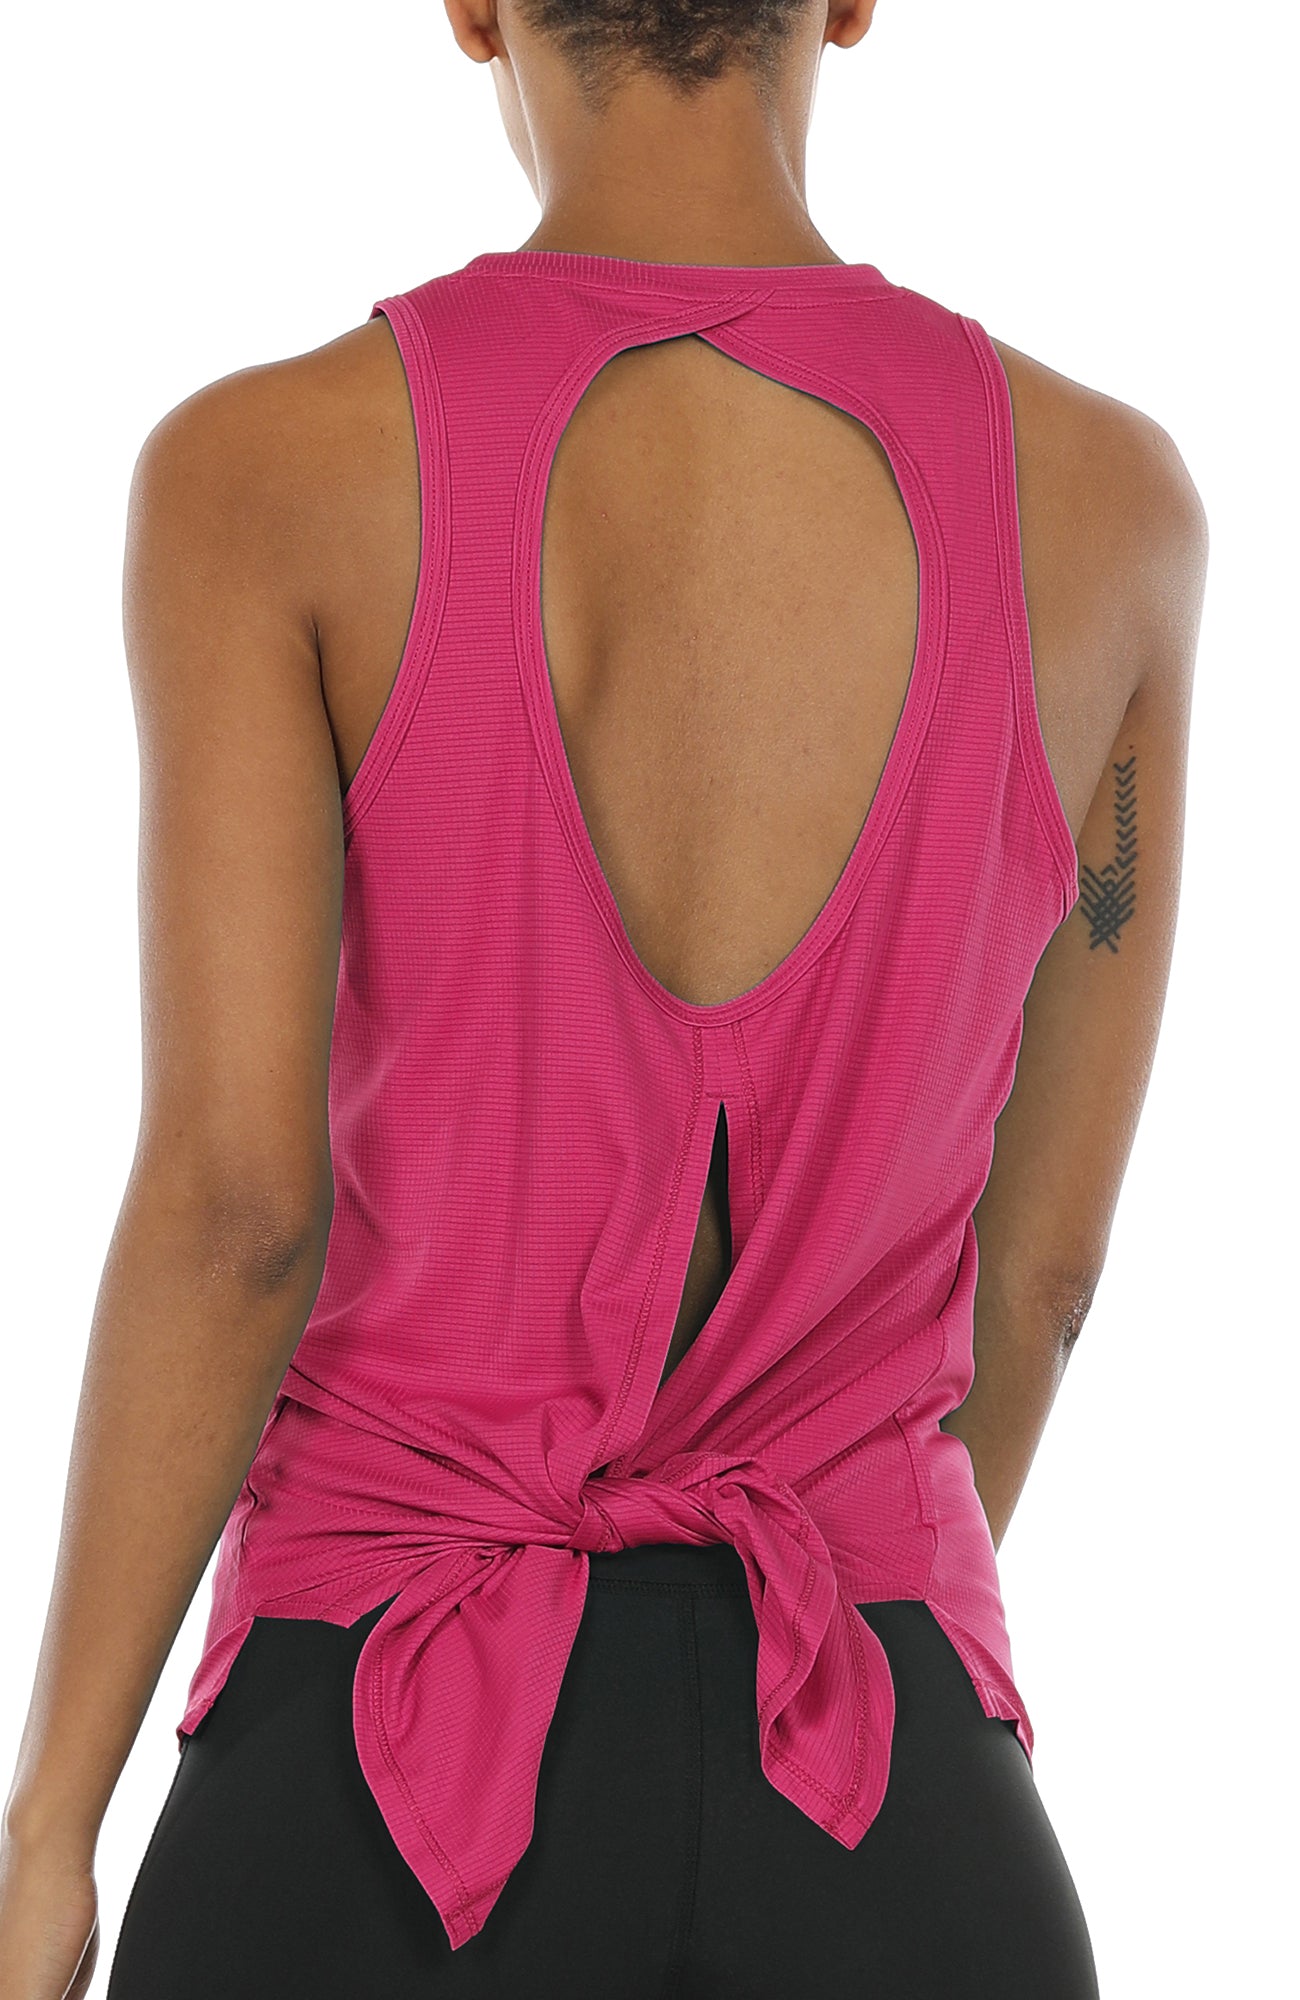 Breathable Backless Strappy Back Yoga Top For Women Perfect For Gym,  Running, And Sports From Play_sports, $15.53